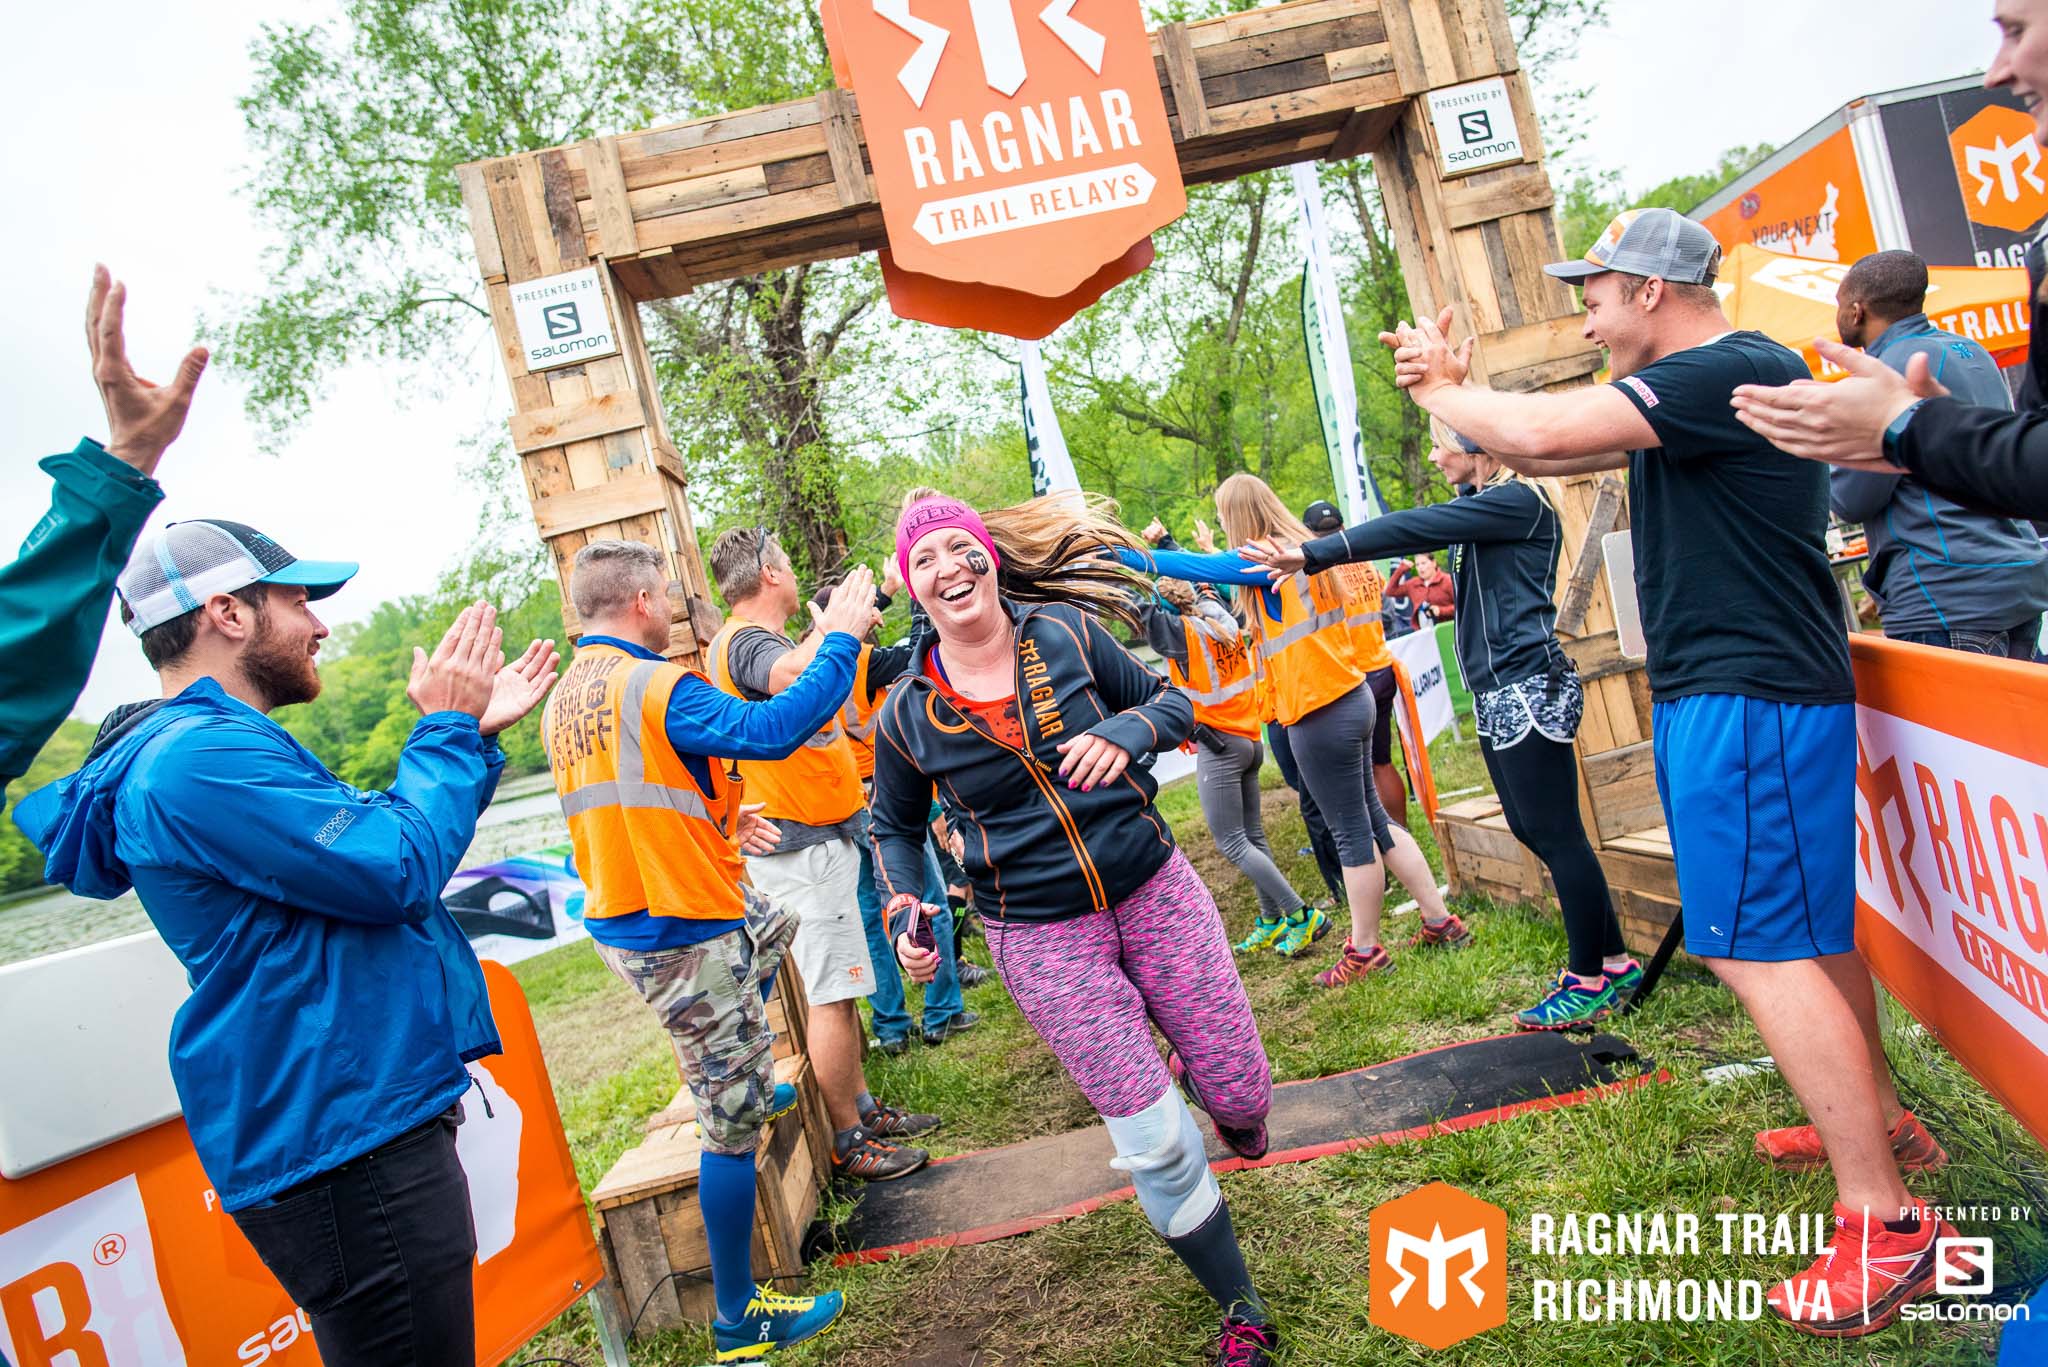 kloof plotseling Immigratie Registration Now Open for Ragnar Trail Richmond-VA - Sports Backers